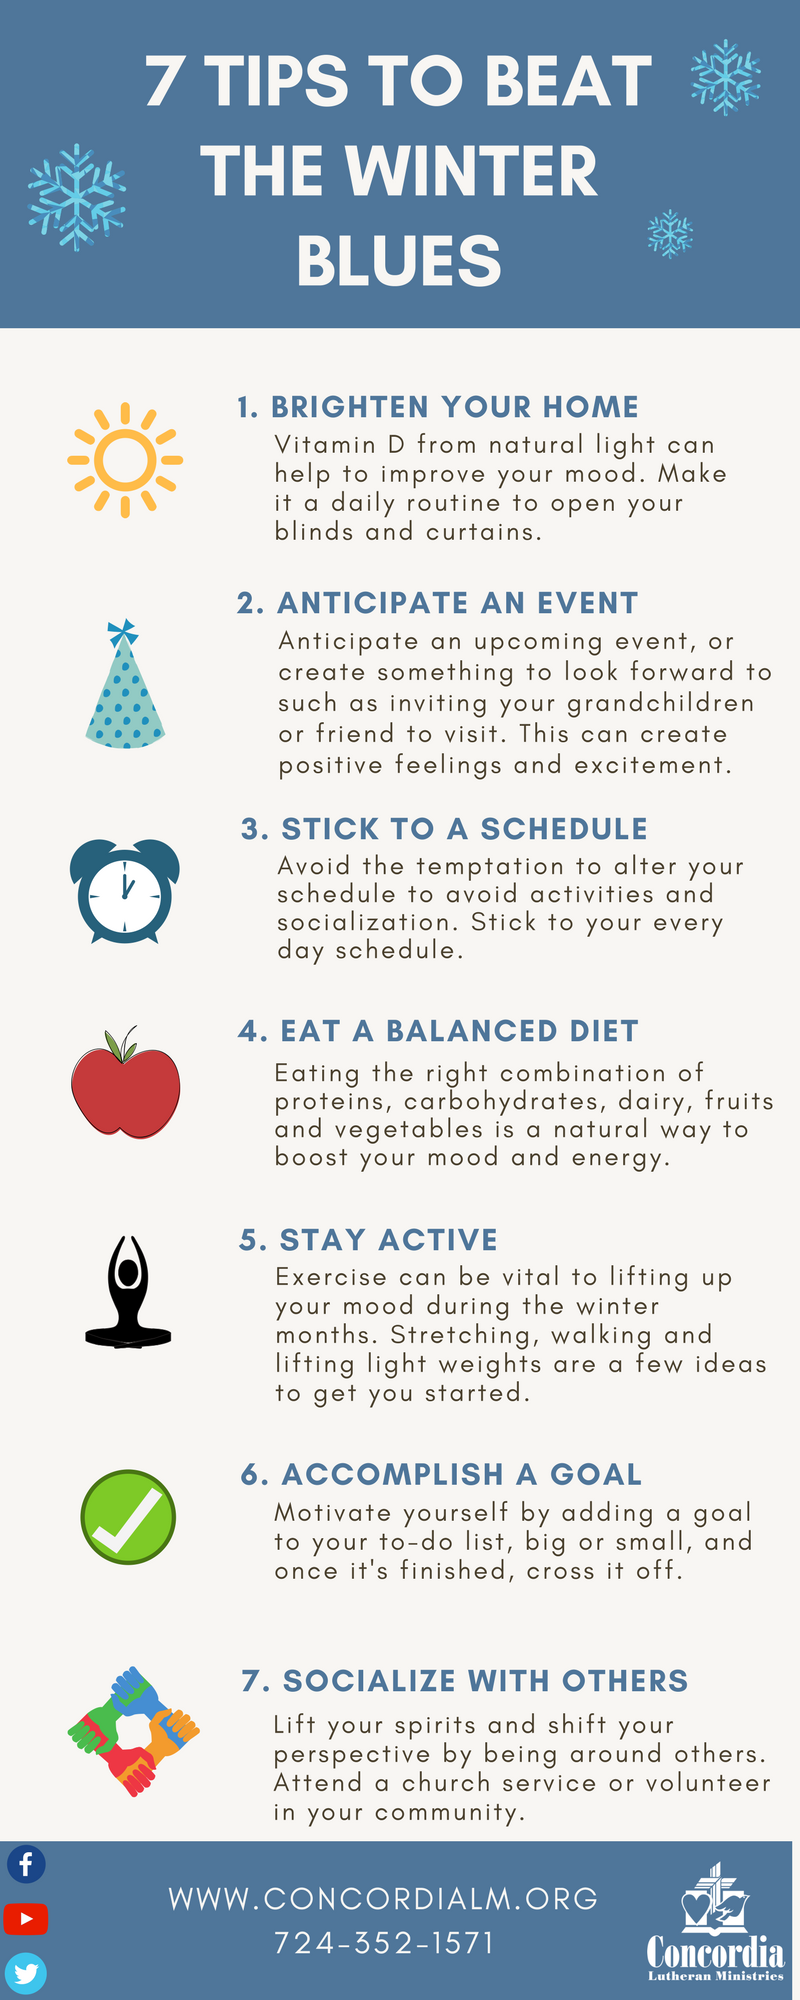 7 Tips to Beat the Winter Blues